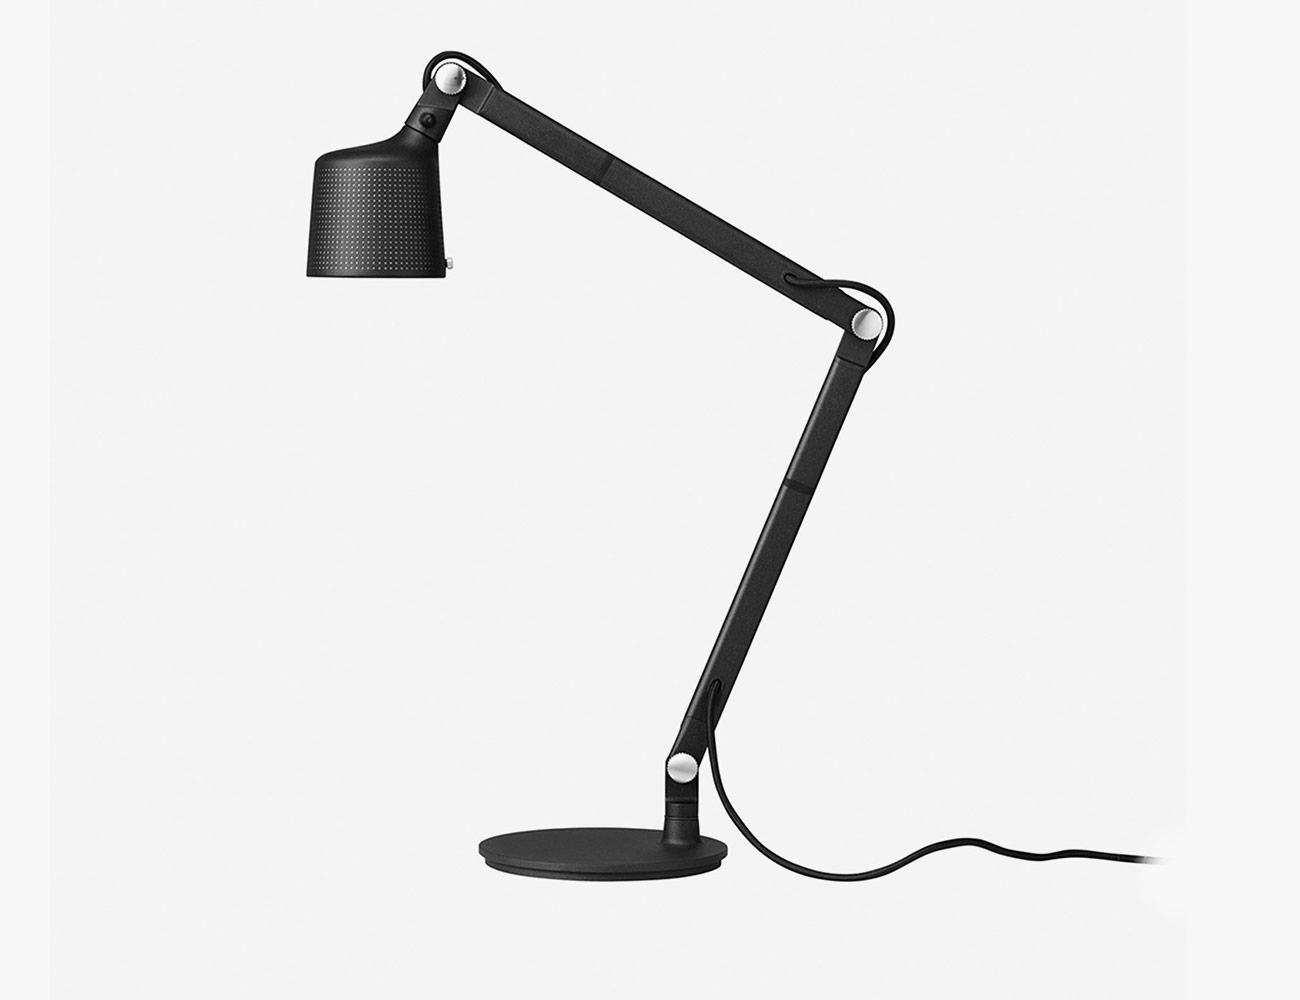 Best Table Lamp For Study Desk Wirecutter Lamps Dorms Party in measurements 1300 X 1000